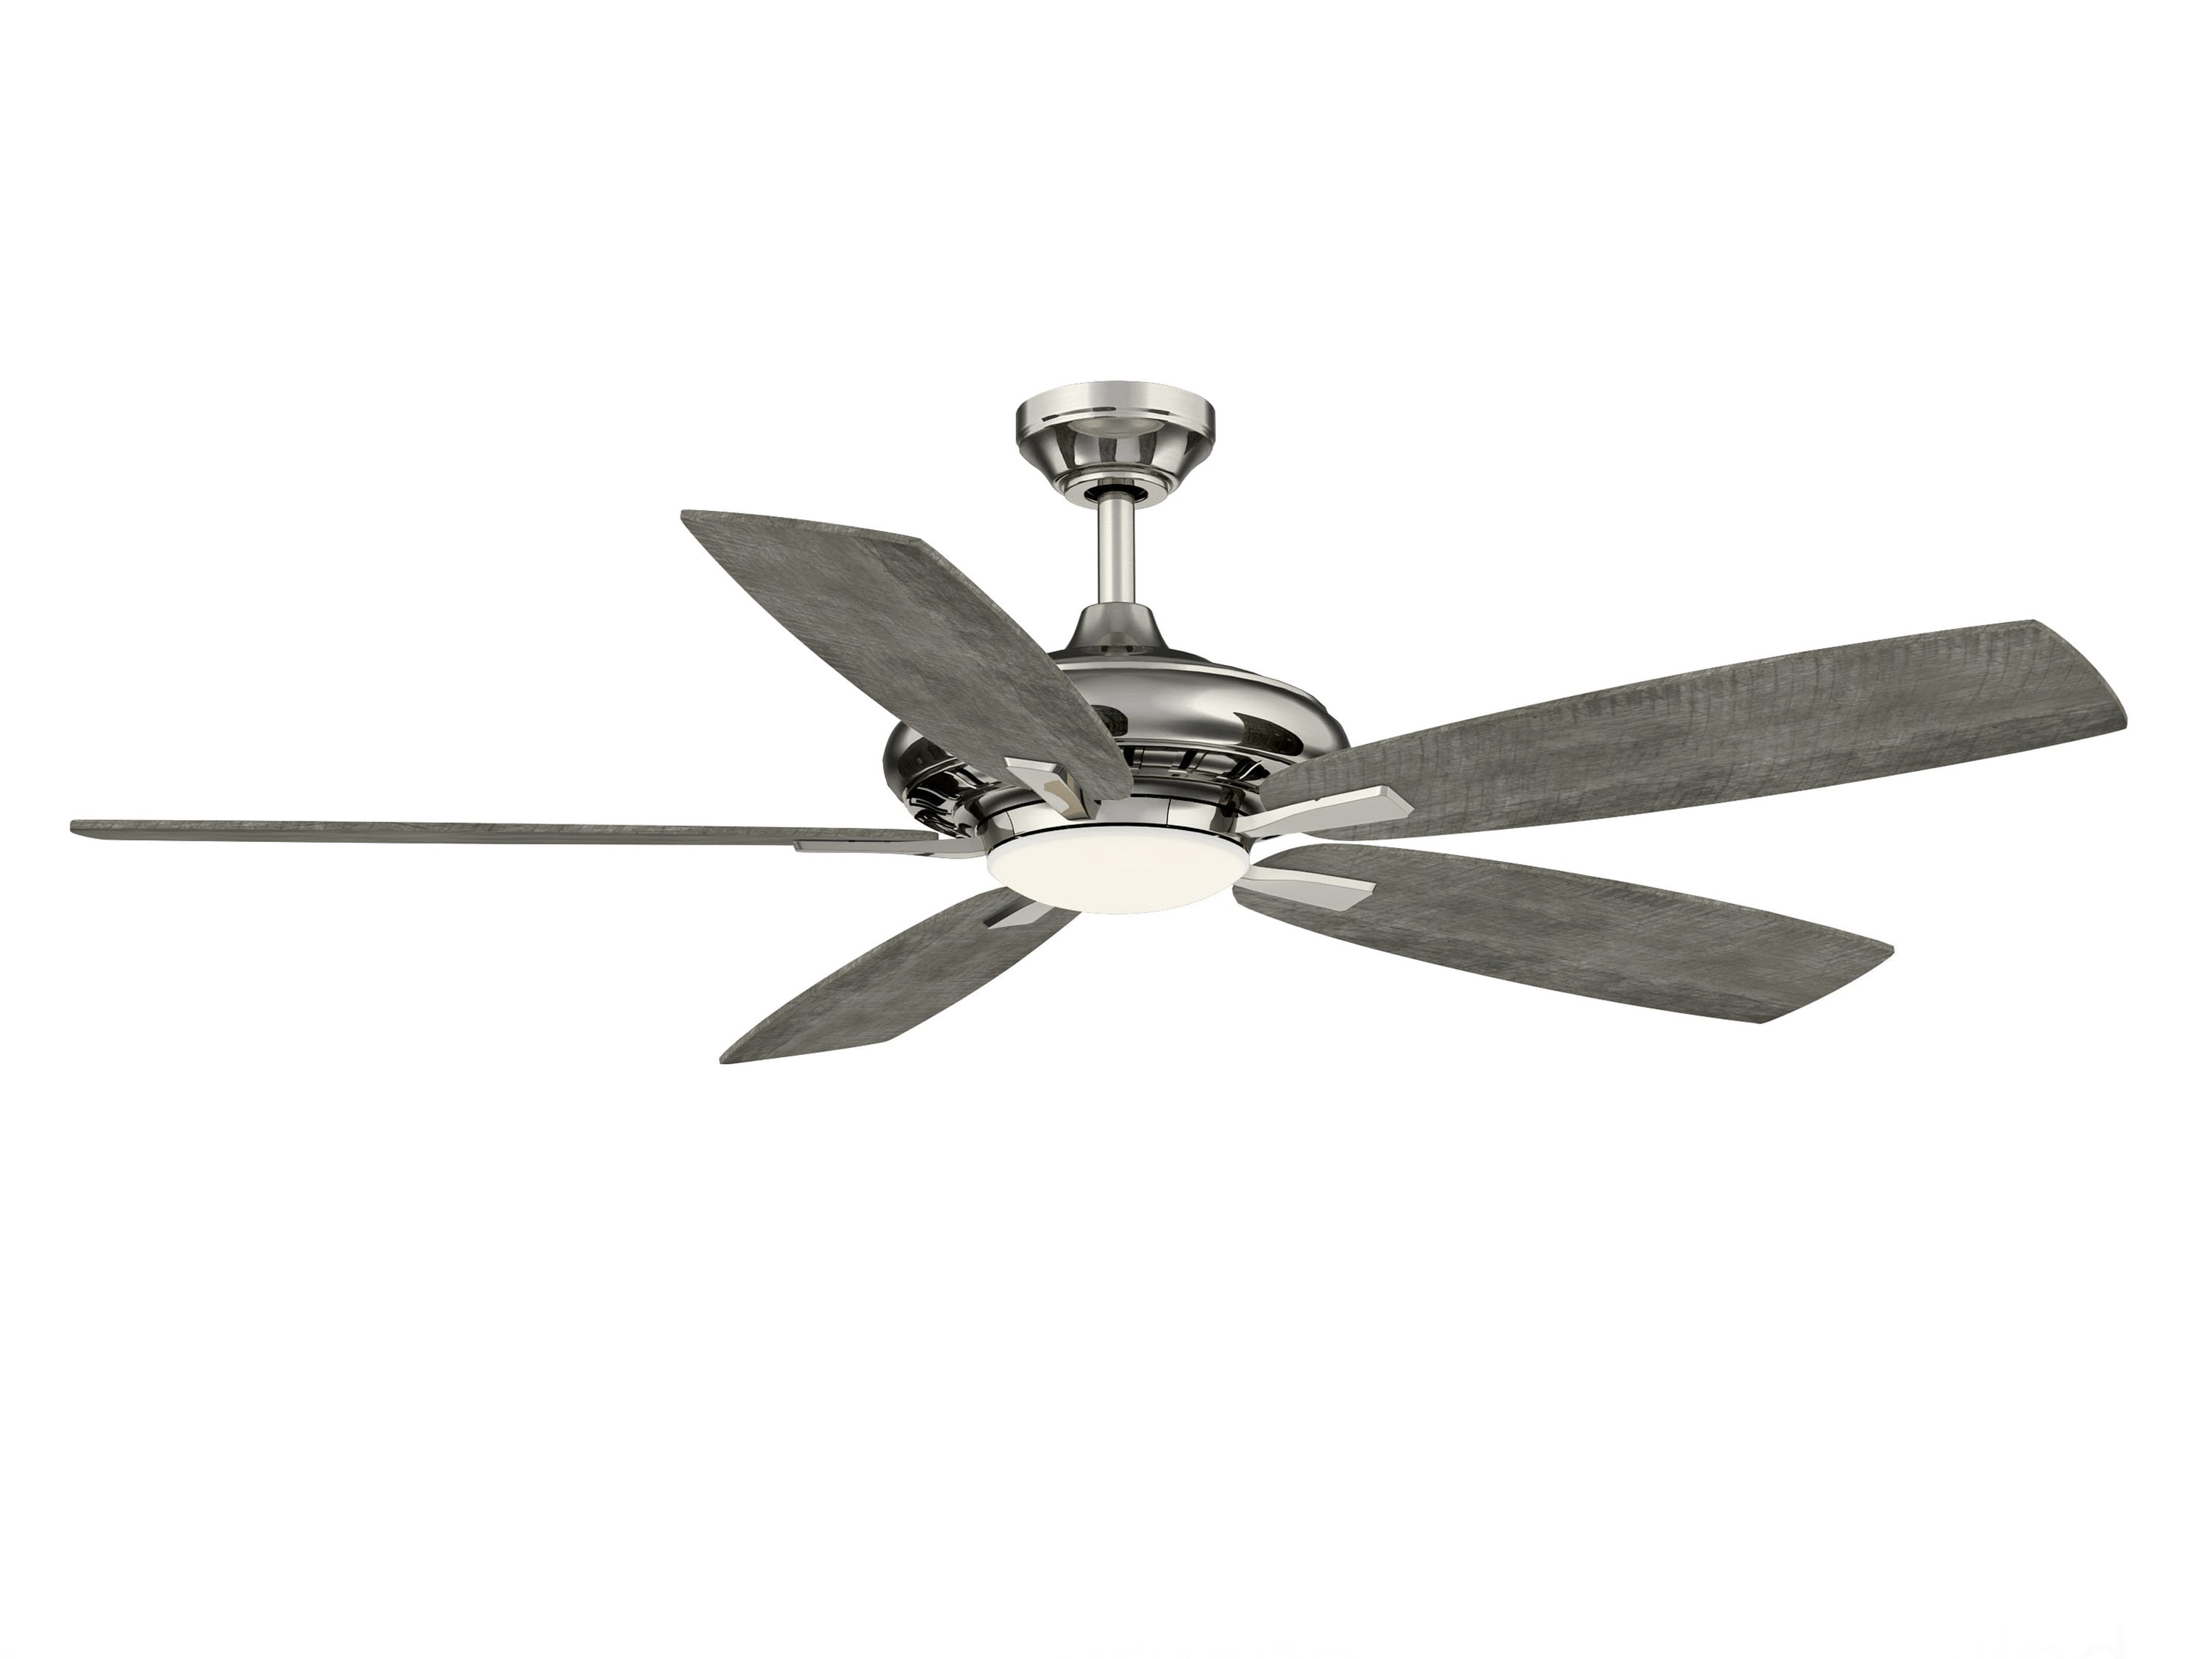 PINNKL Fan Light Ceiling 31W Ceiling Fans with Lights and Remote